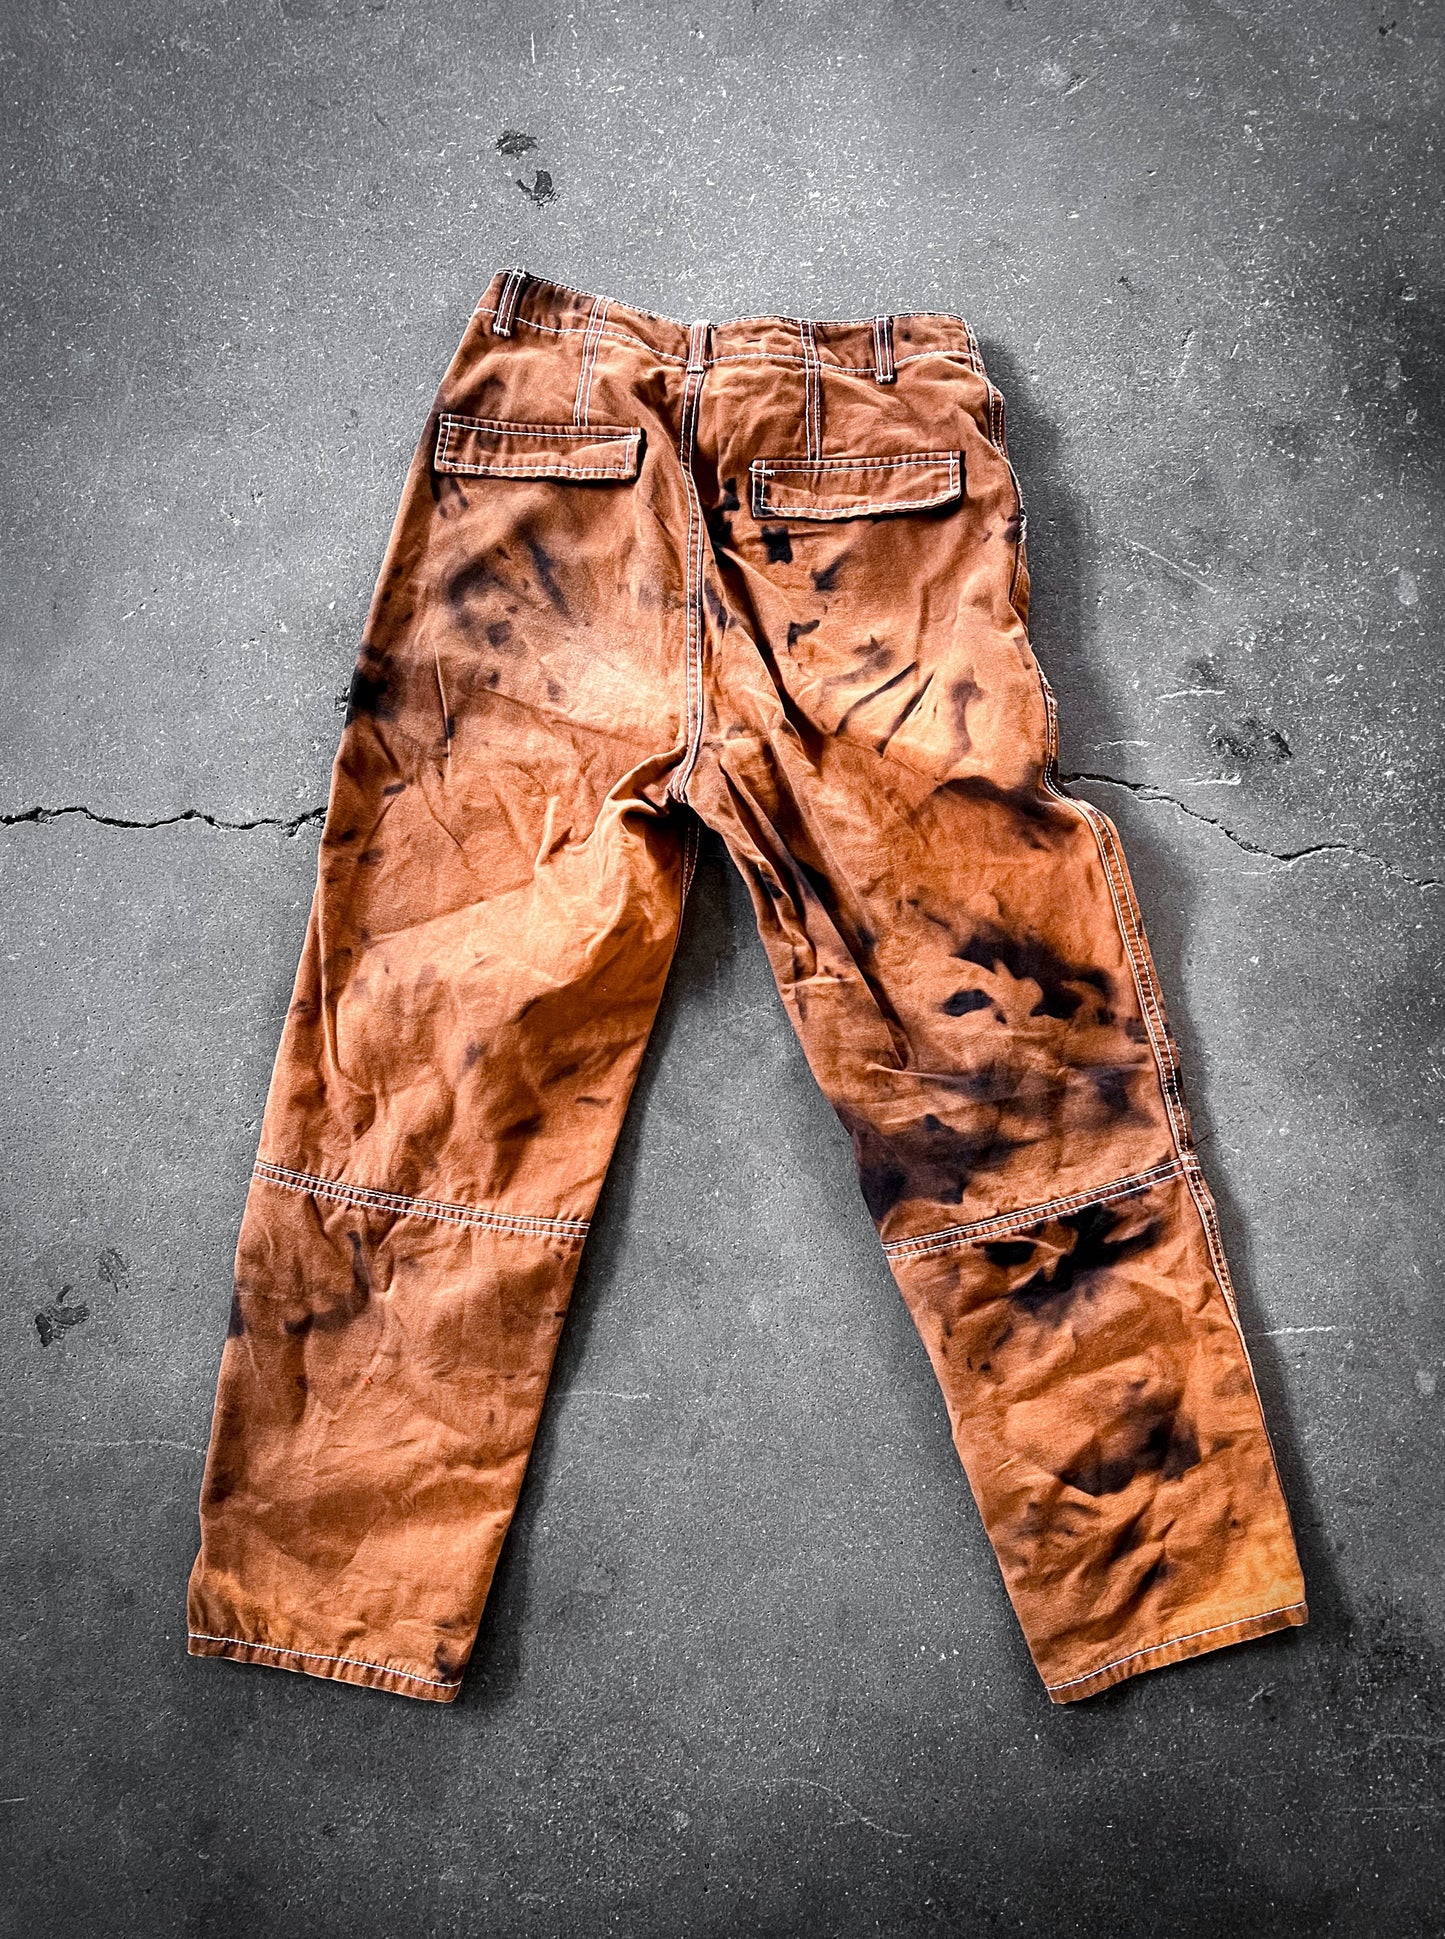 Water Bleached Jeans (#7)